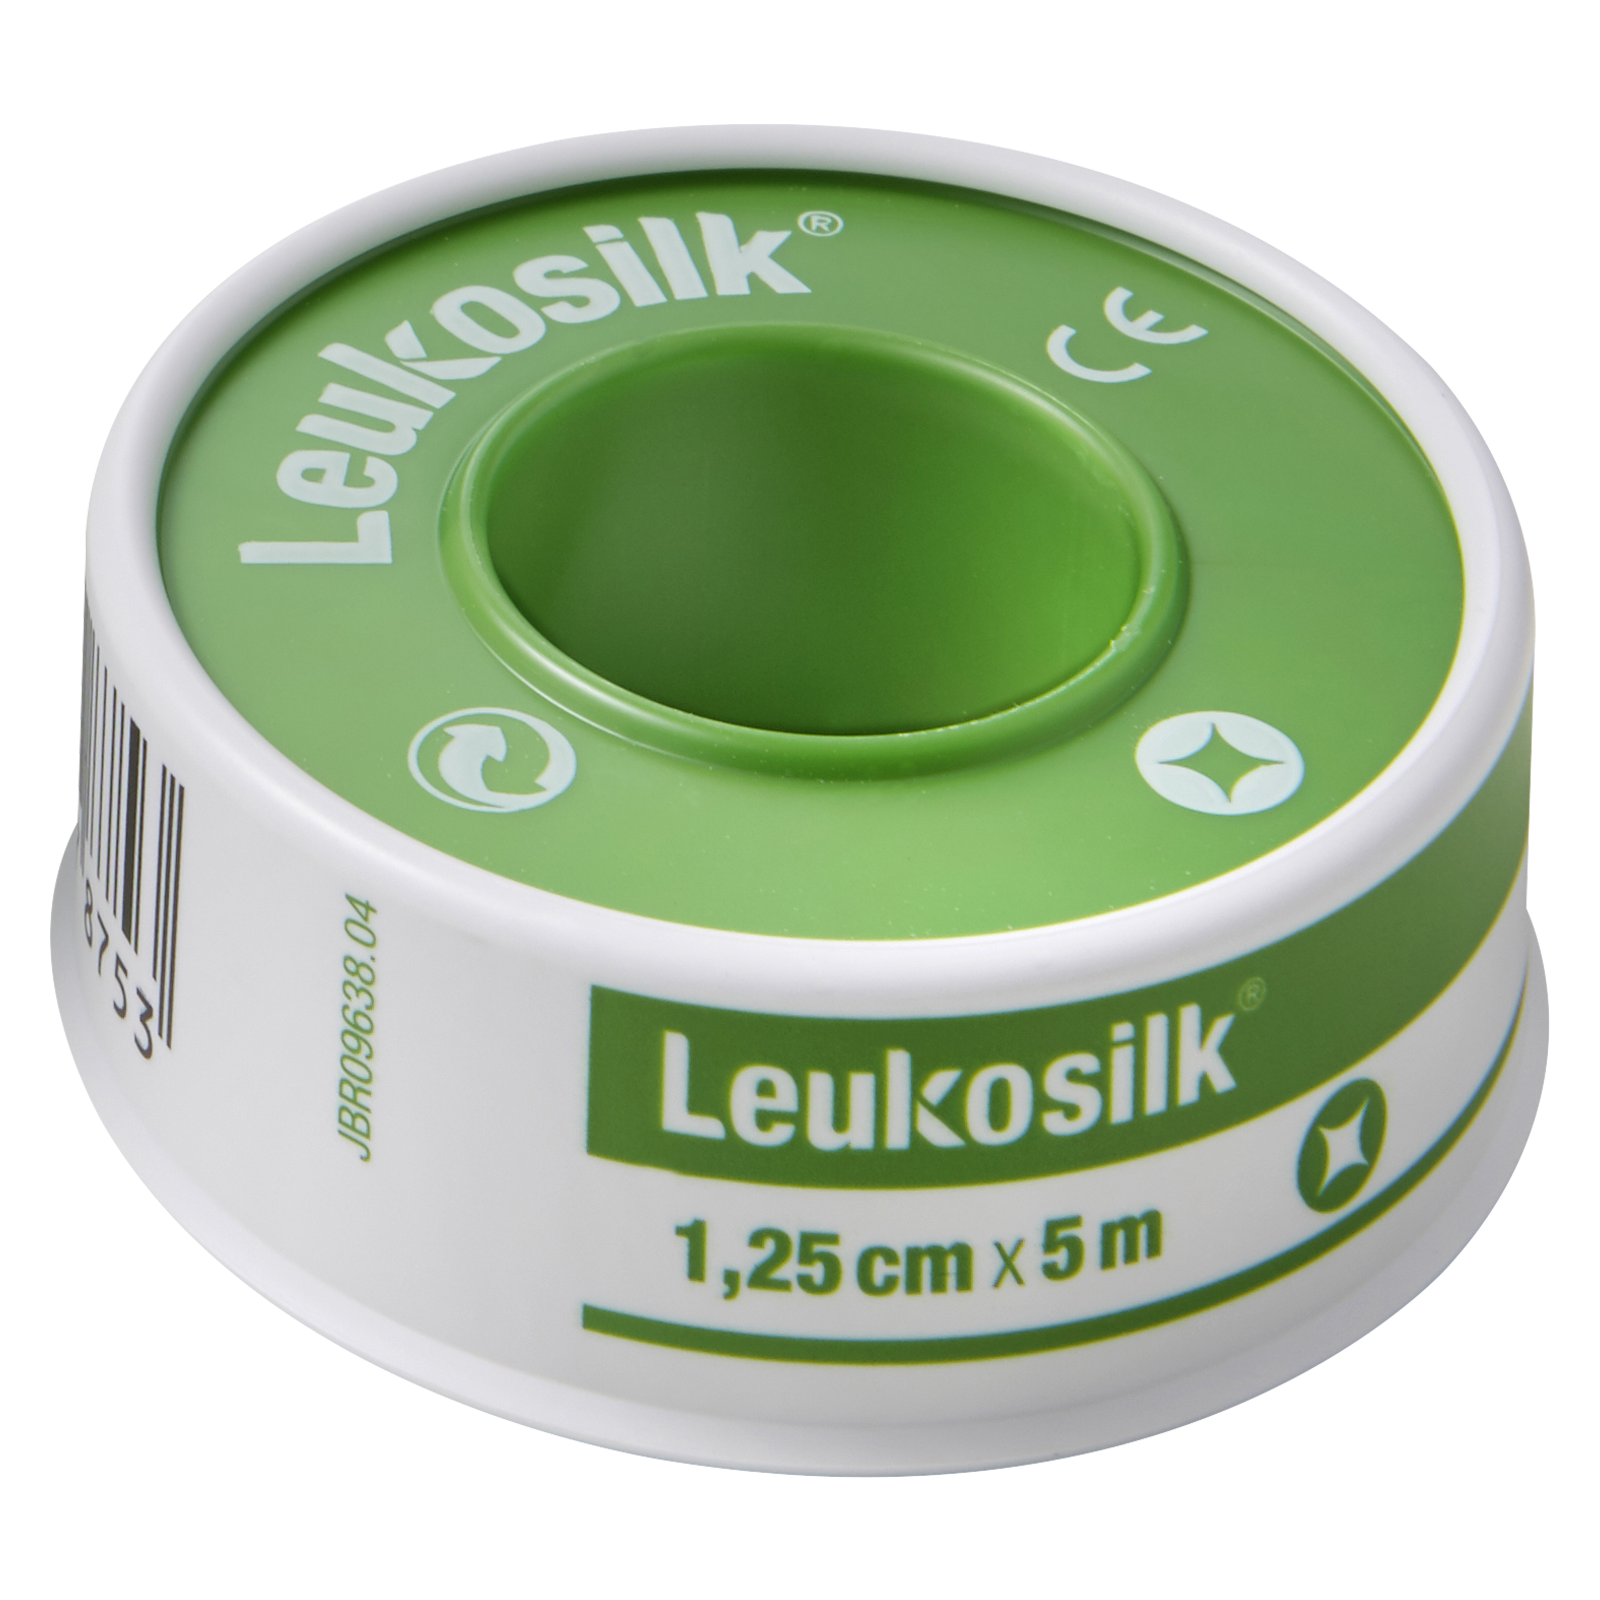 Leukosilk® 5,0 m x 1,25 cm - GEHWOL: Foot care products for foot